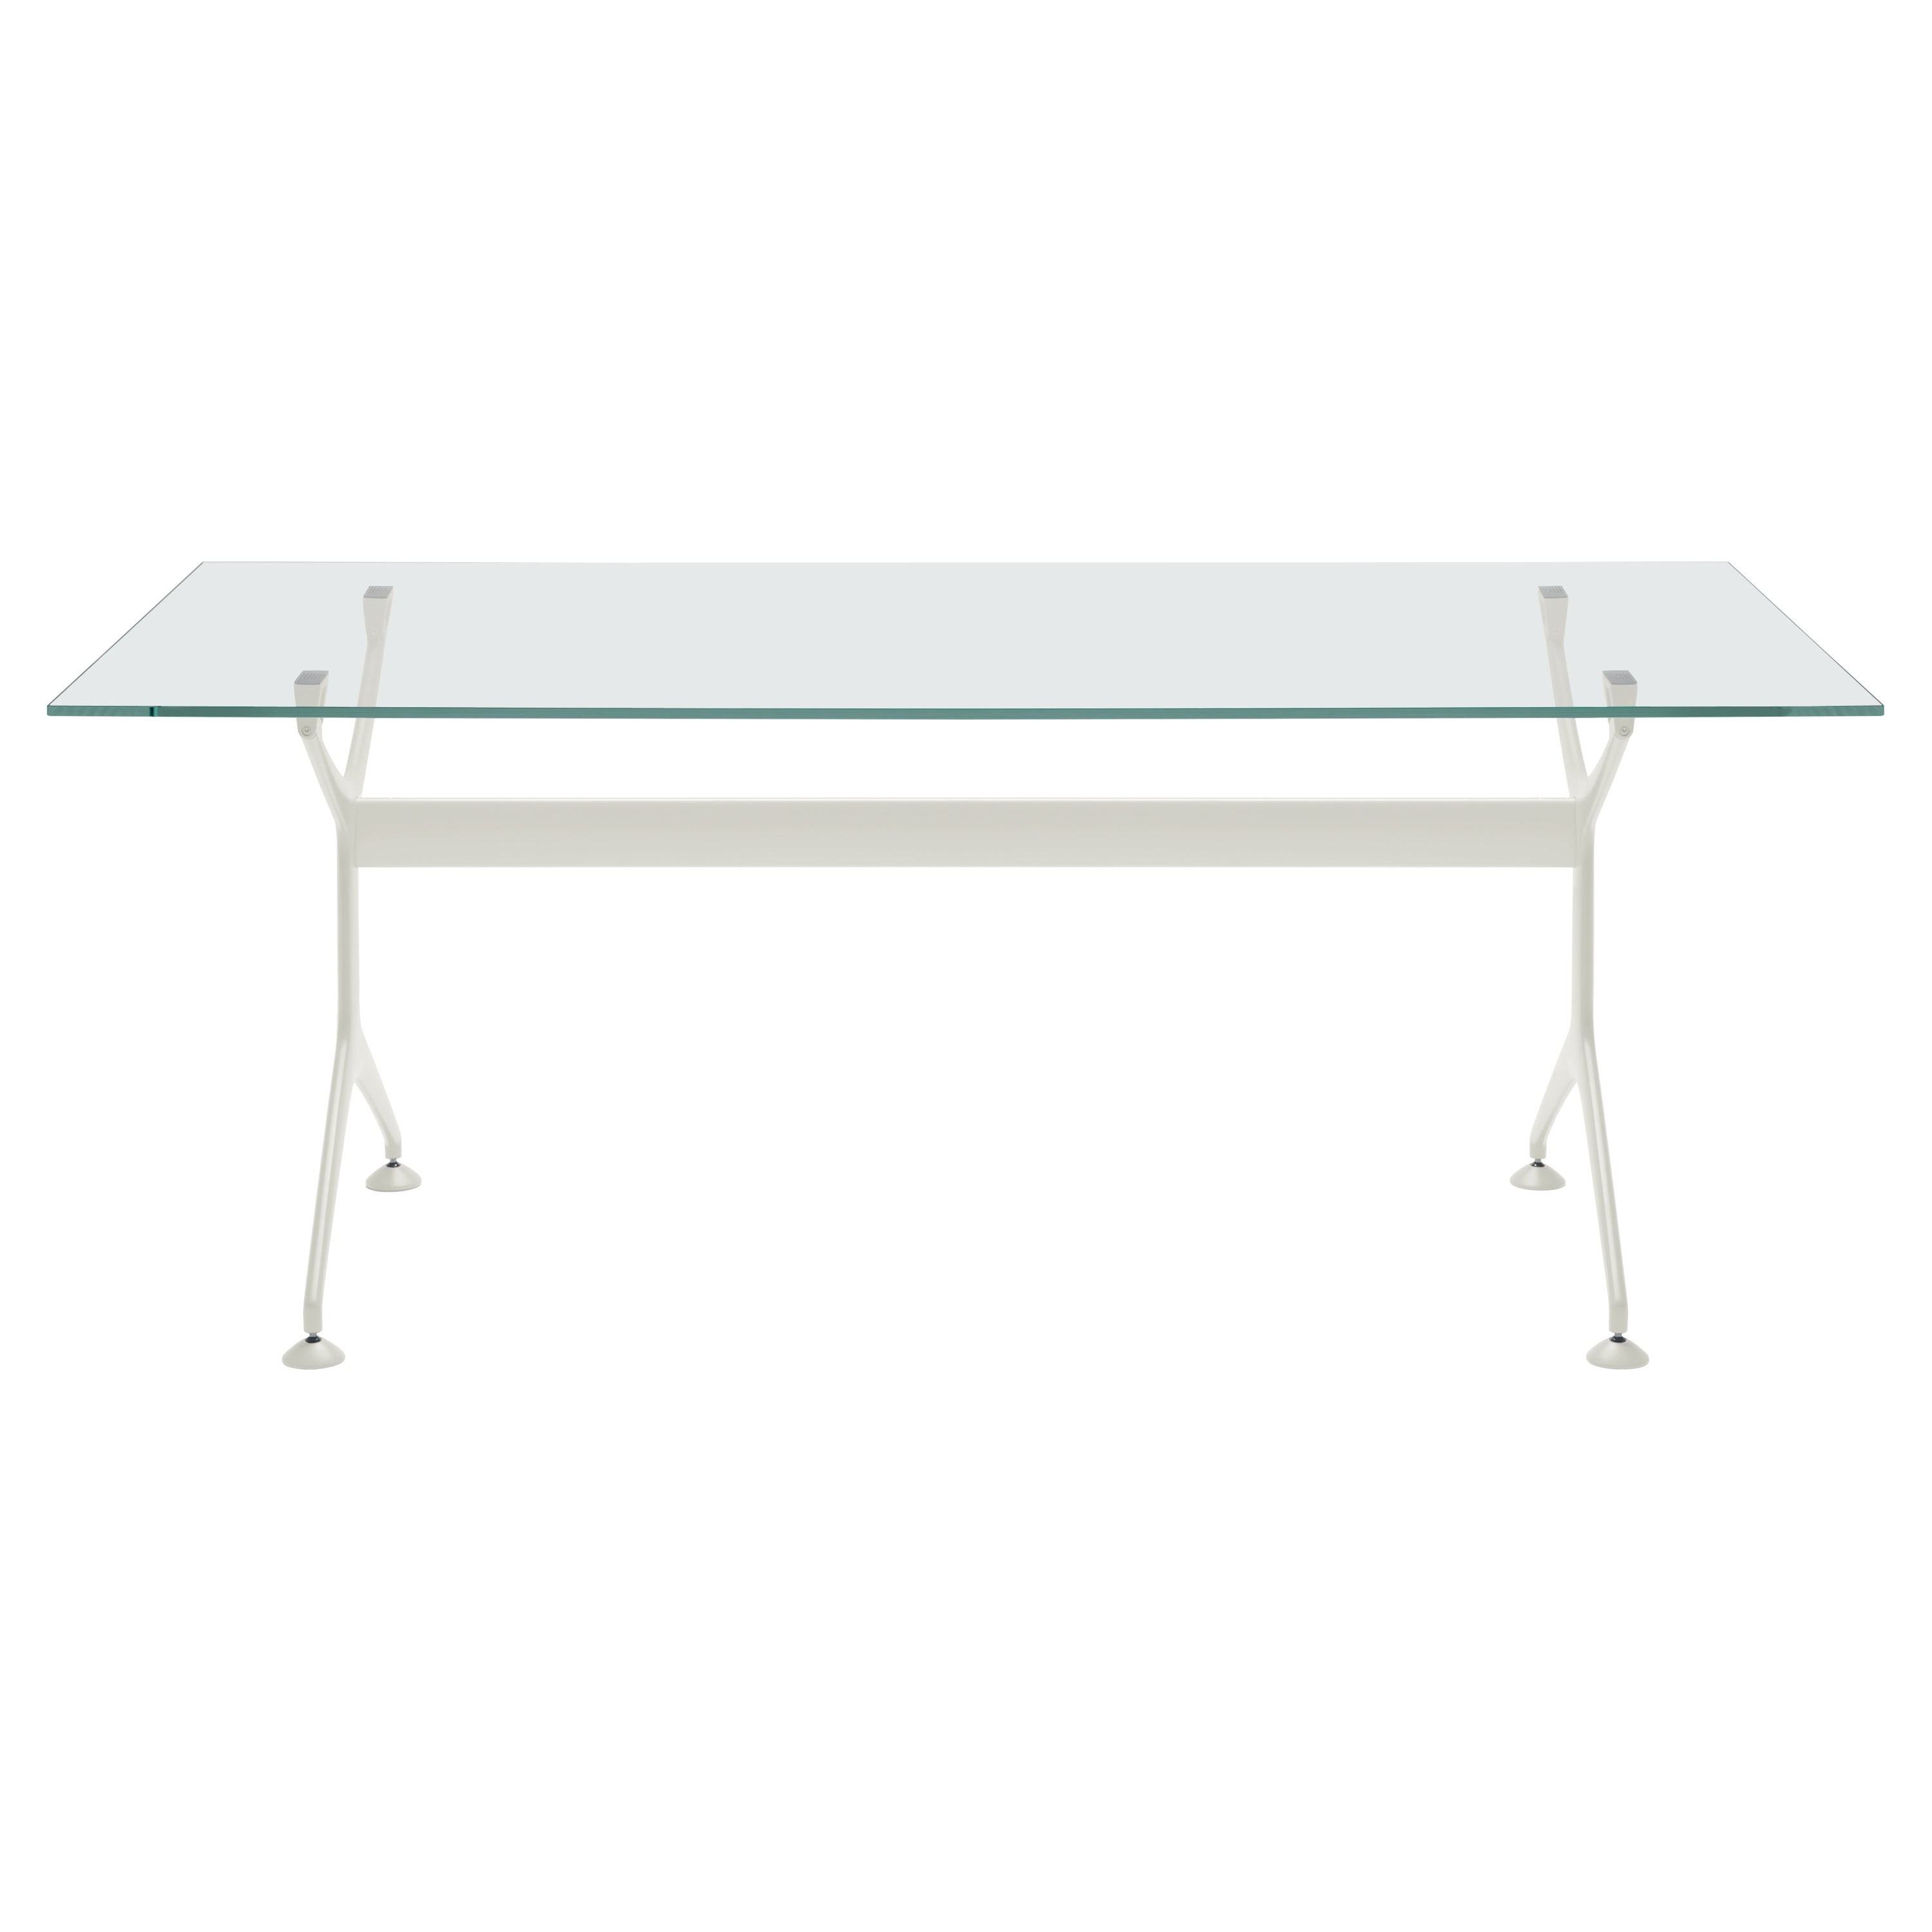 Alias Frametable 190 in Glass Top with White Lacquered Aluminium Frame